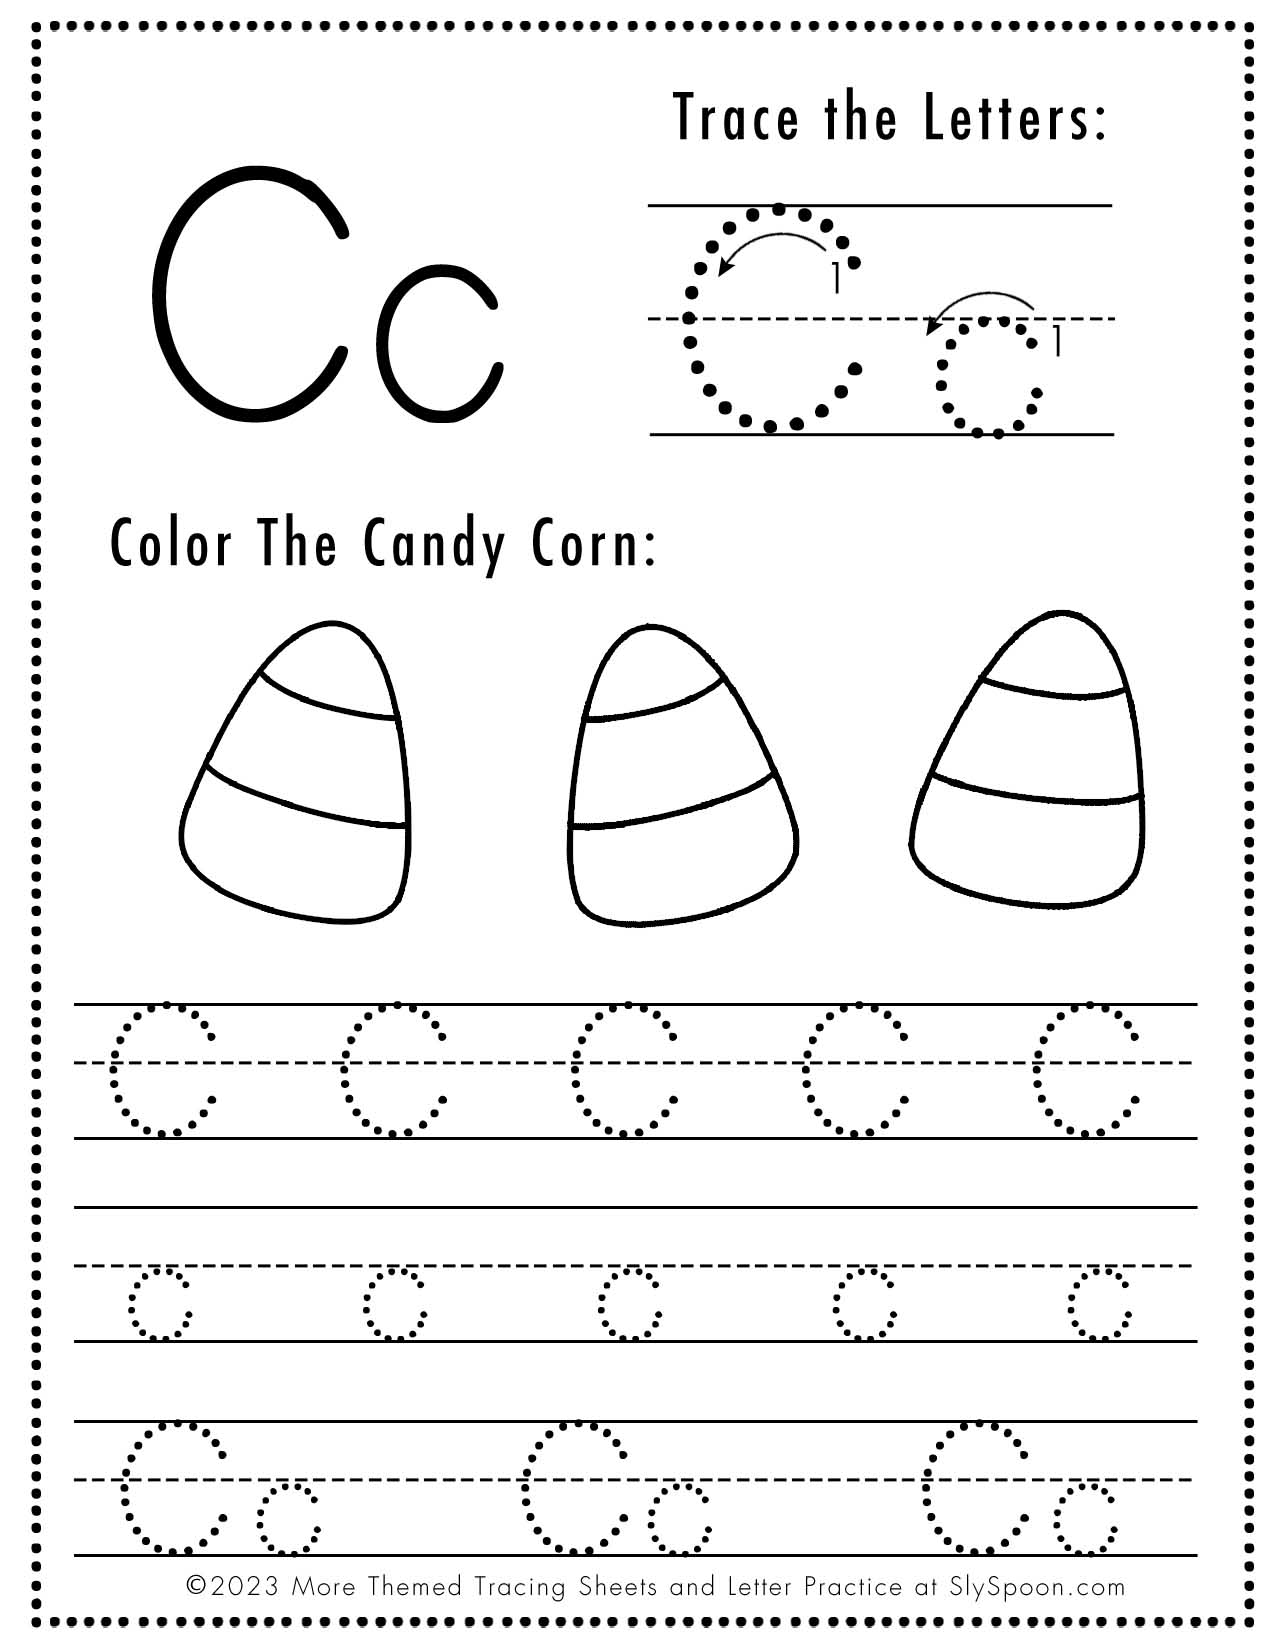 Free Printable Halloween Themed Letter C Tracing Worksheet! - Sly Spoon